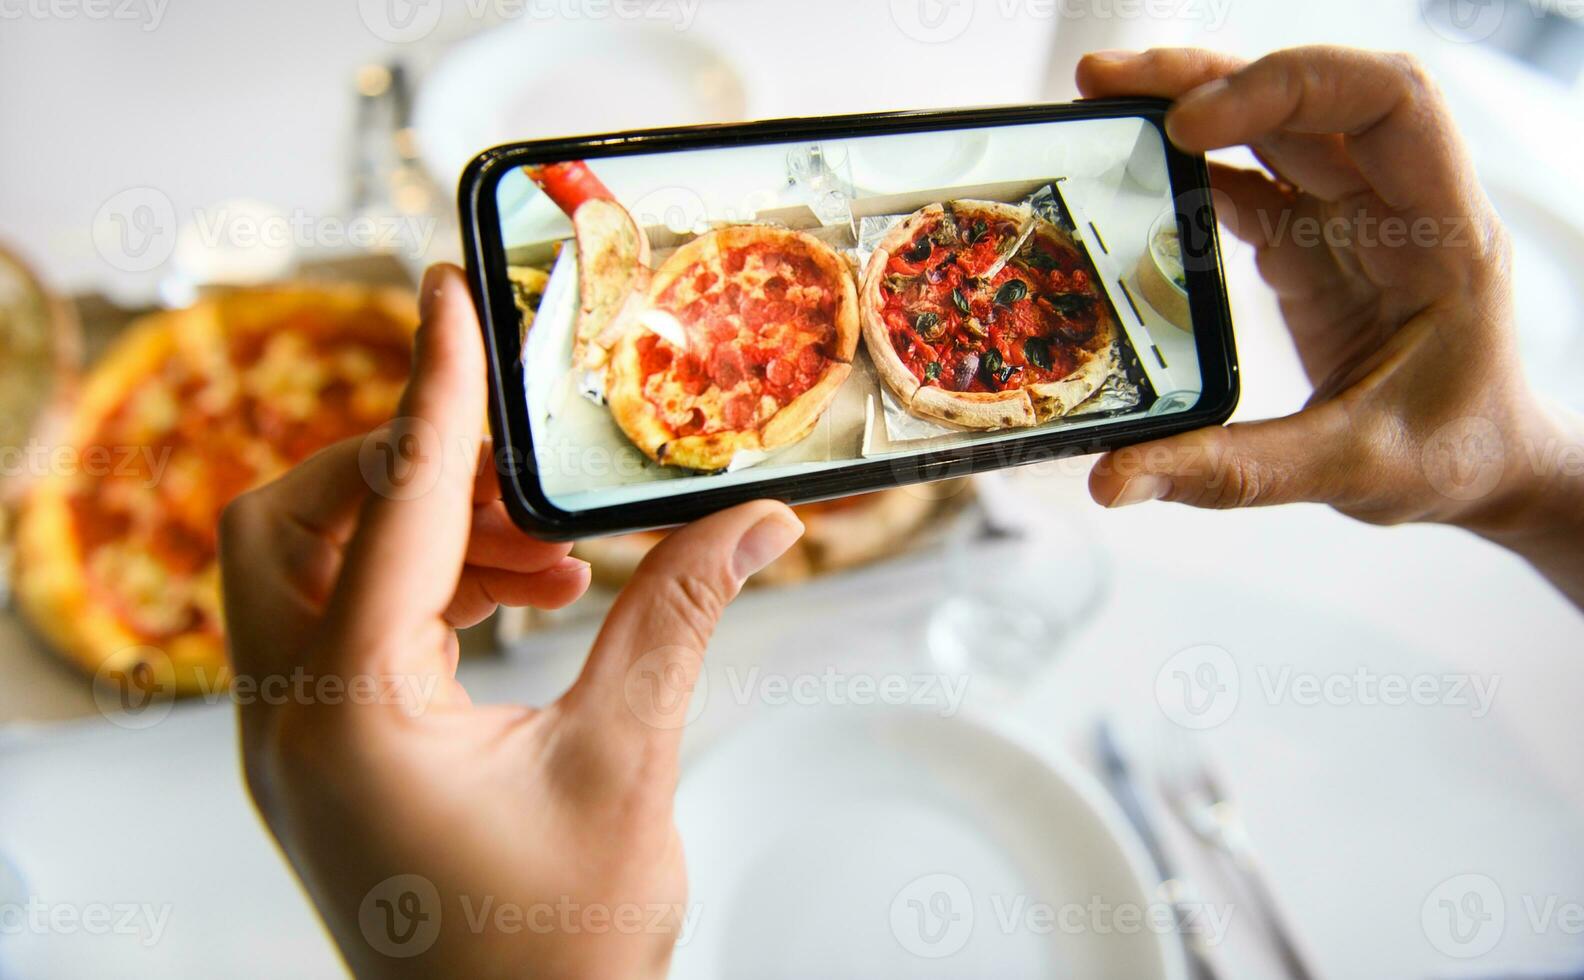 Hands holding smartphone and taking image of delicious freshly baked pizza served on a table with white tablecloth. Mobile phone in live mode regime photo